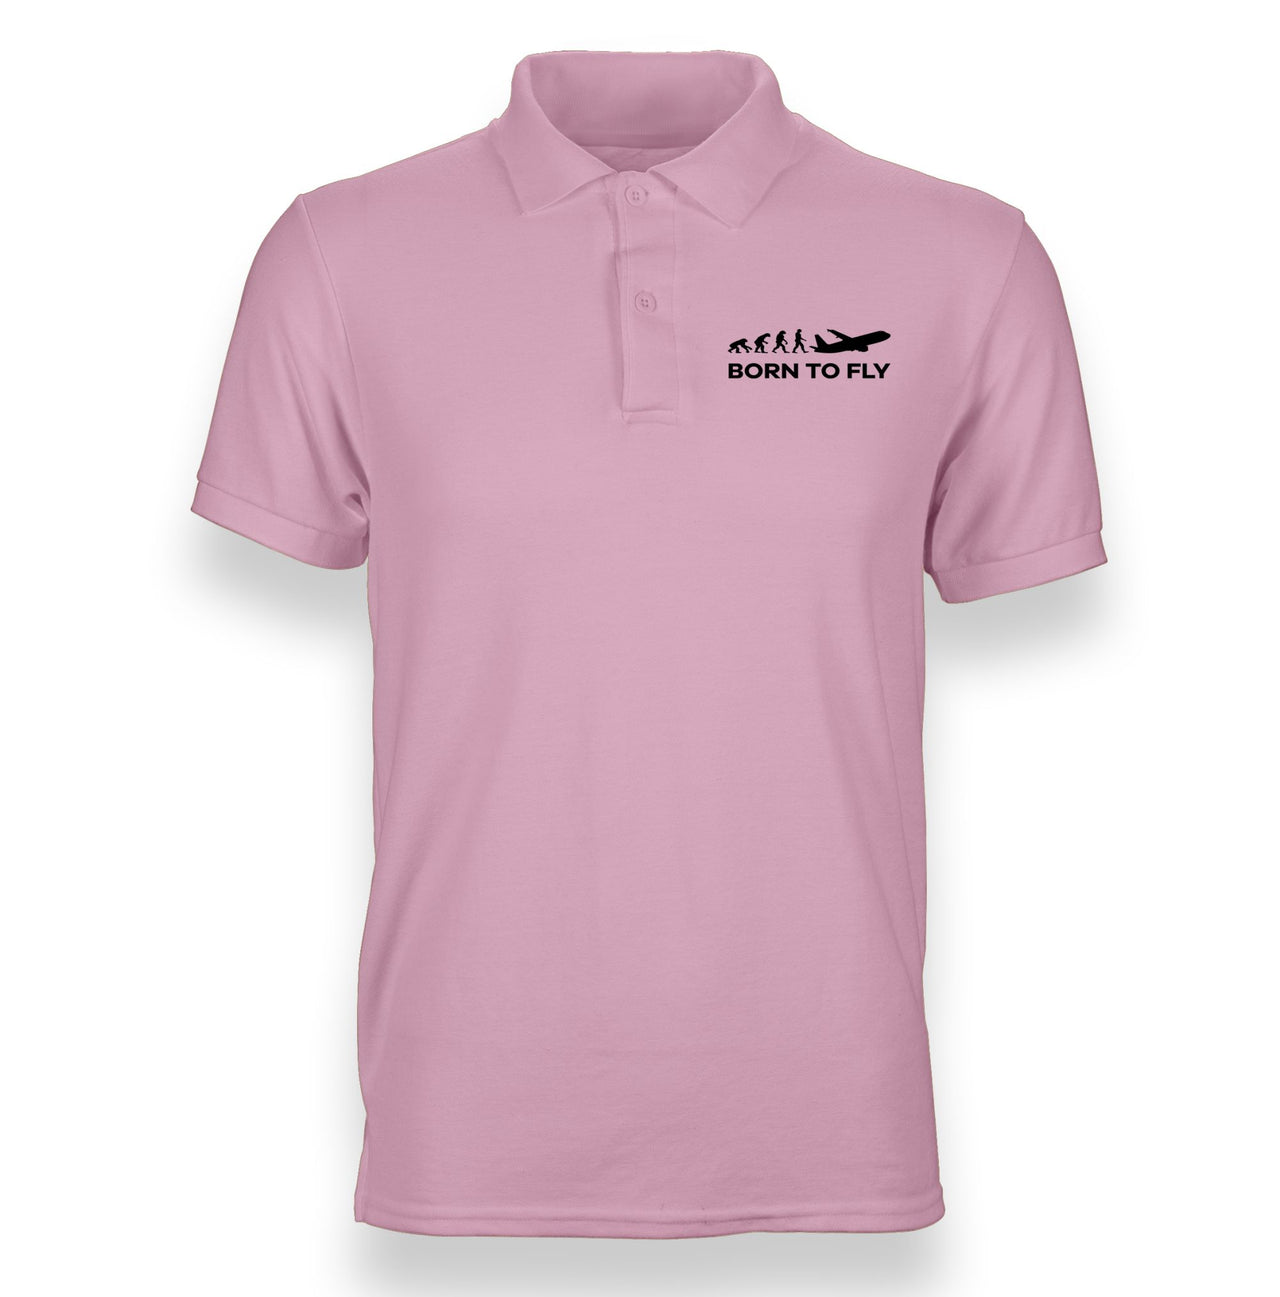 Born To Fly Designed "WOMEN" Polo T-Shirts